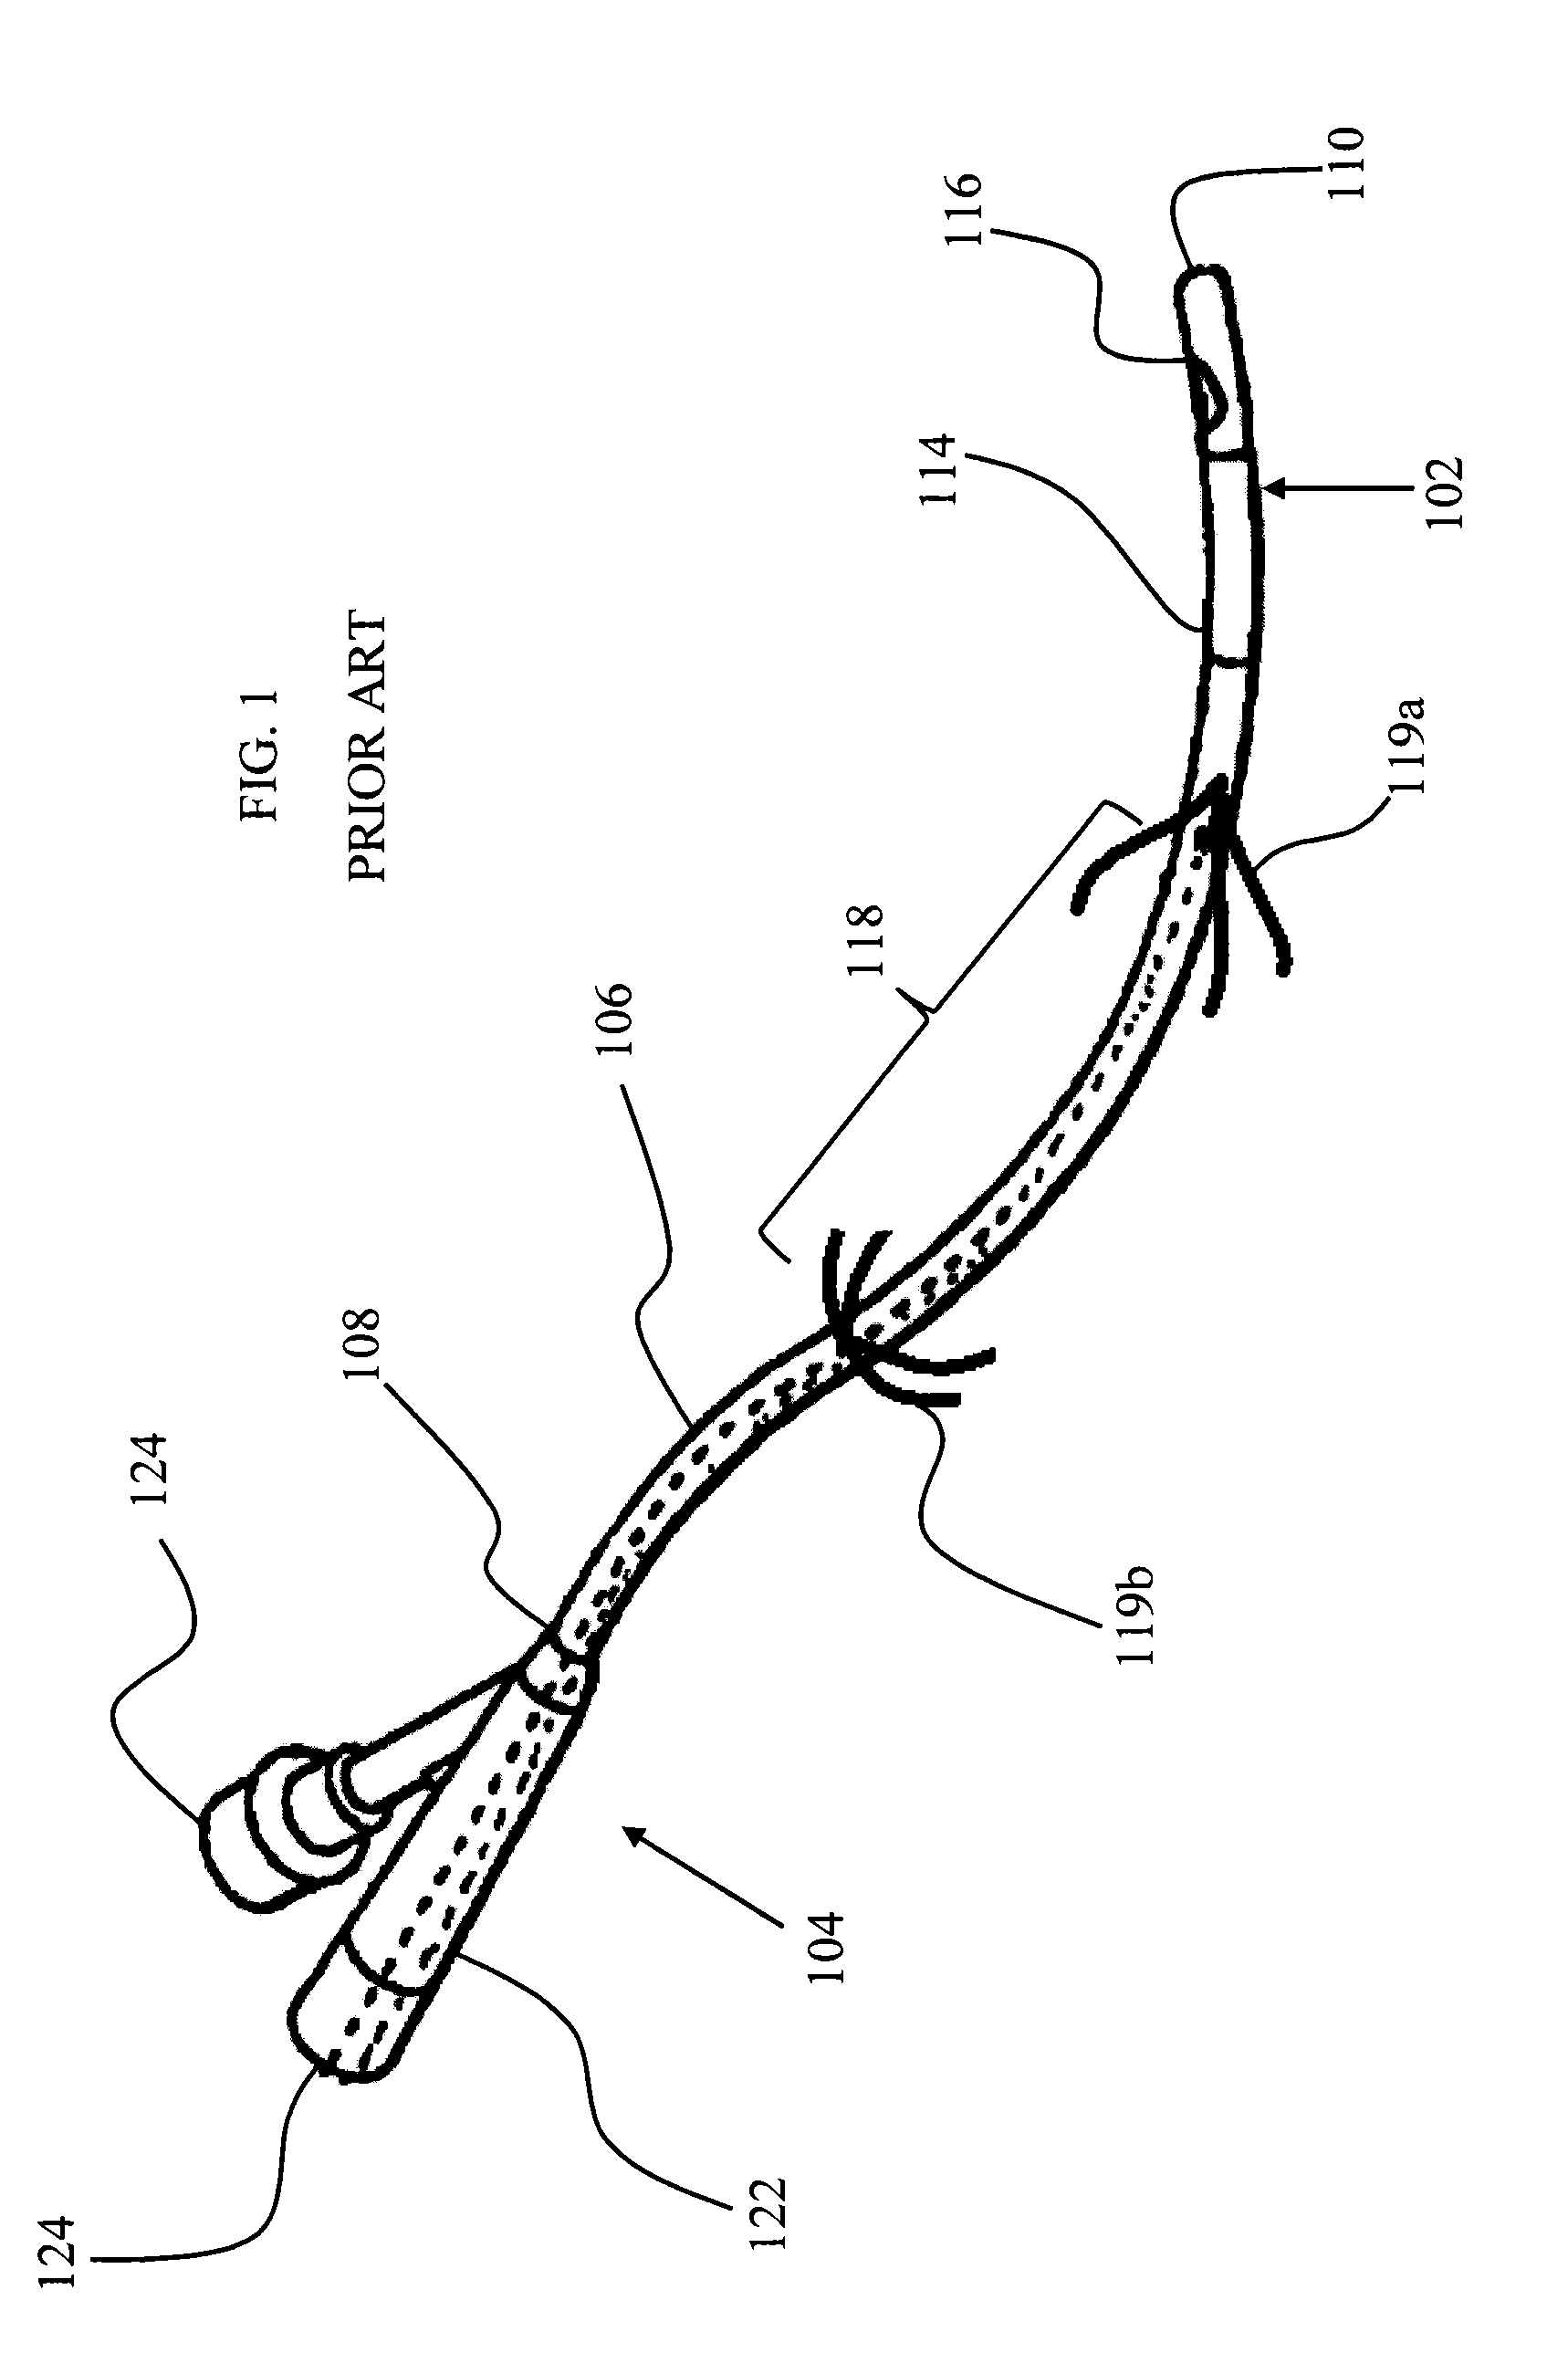 Anastomosis device and related methods